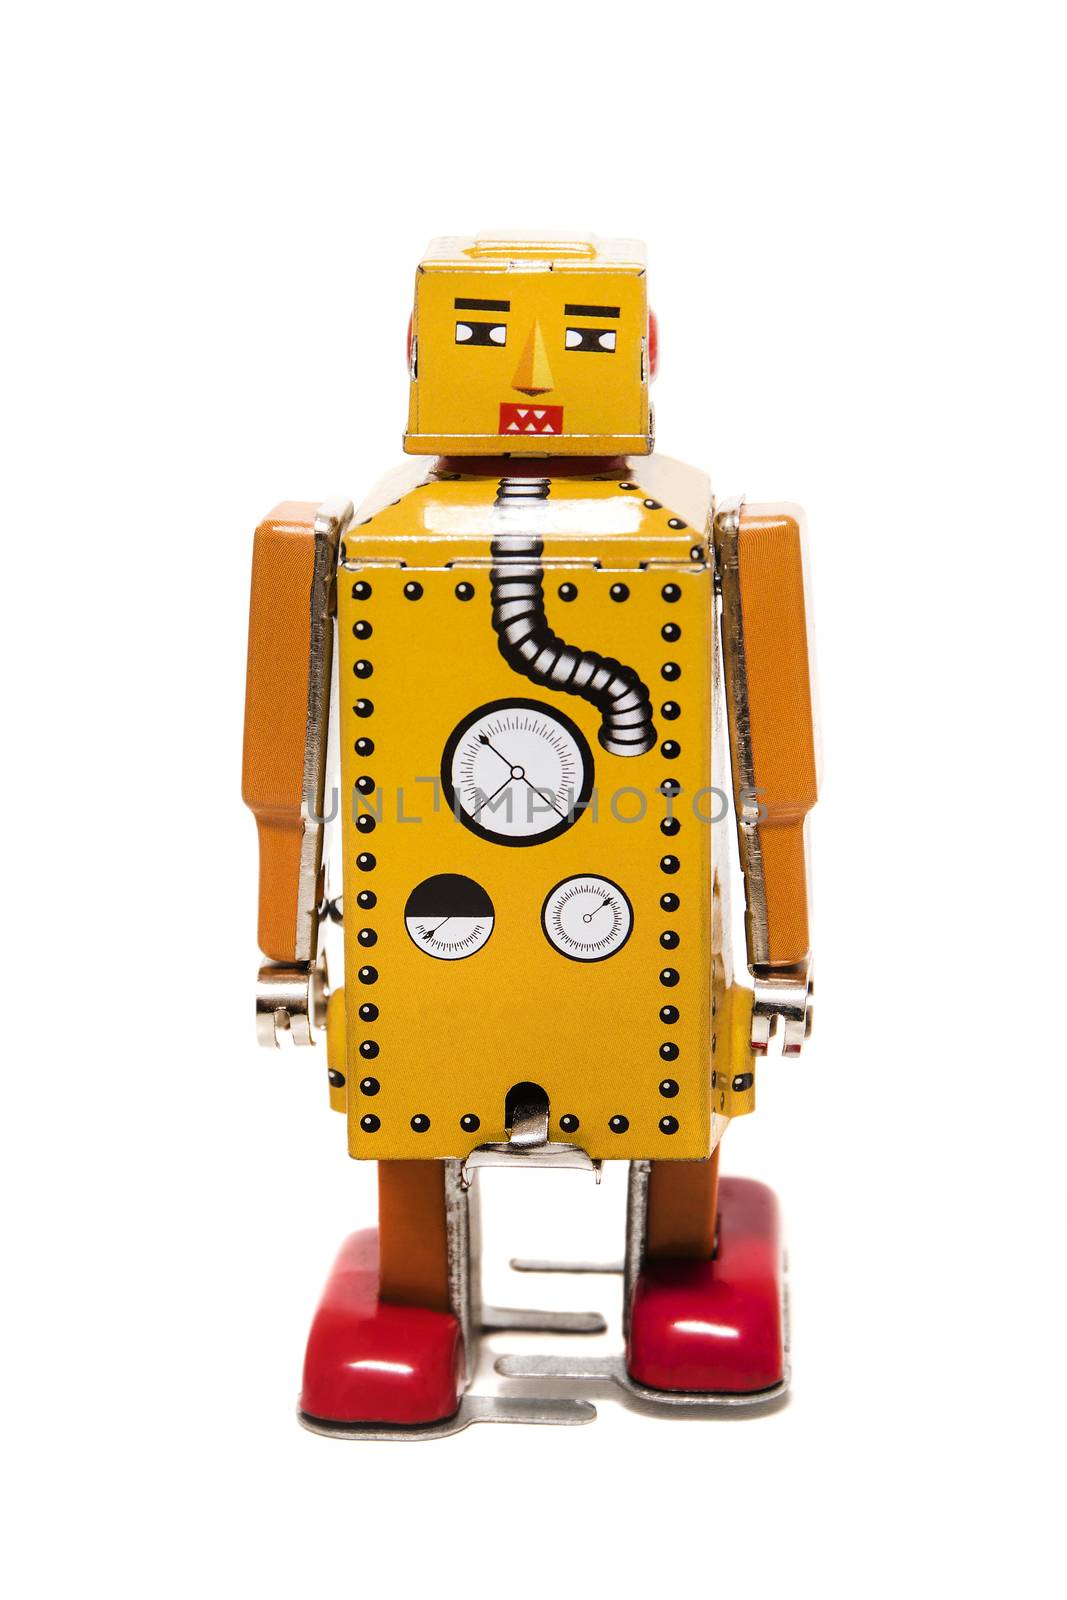 Vintage tin robot toy isolated on a white background.